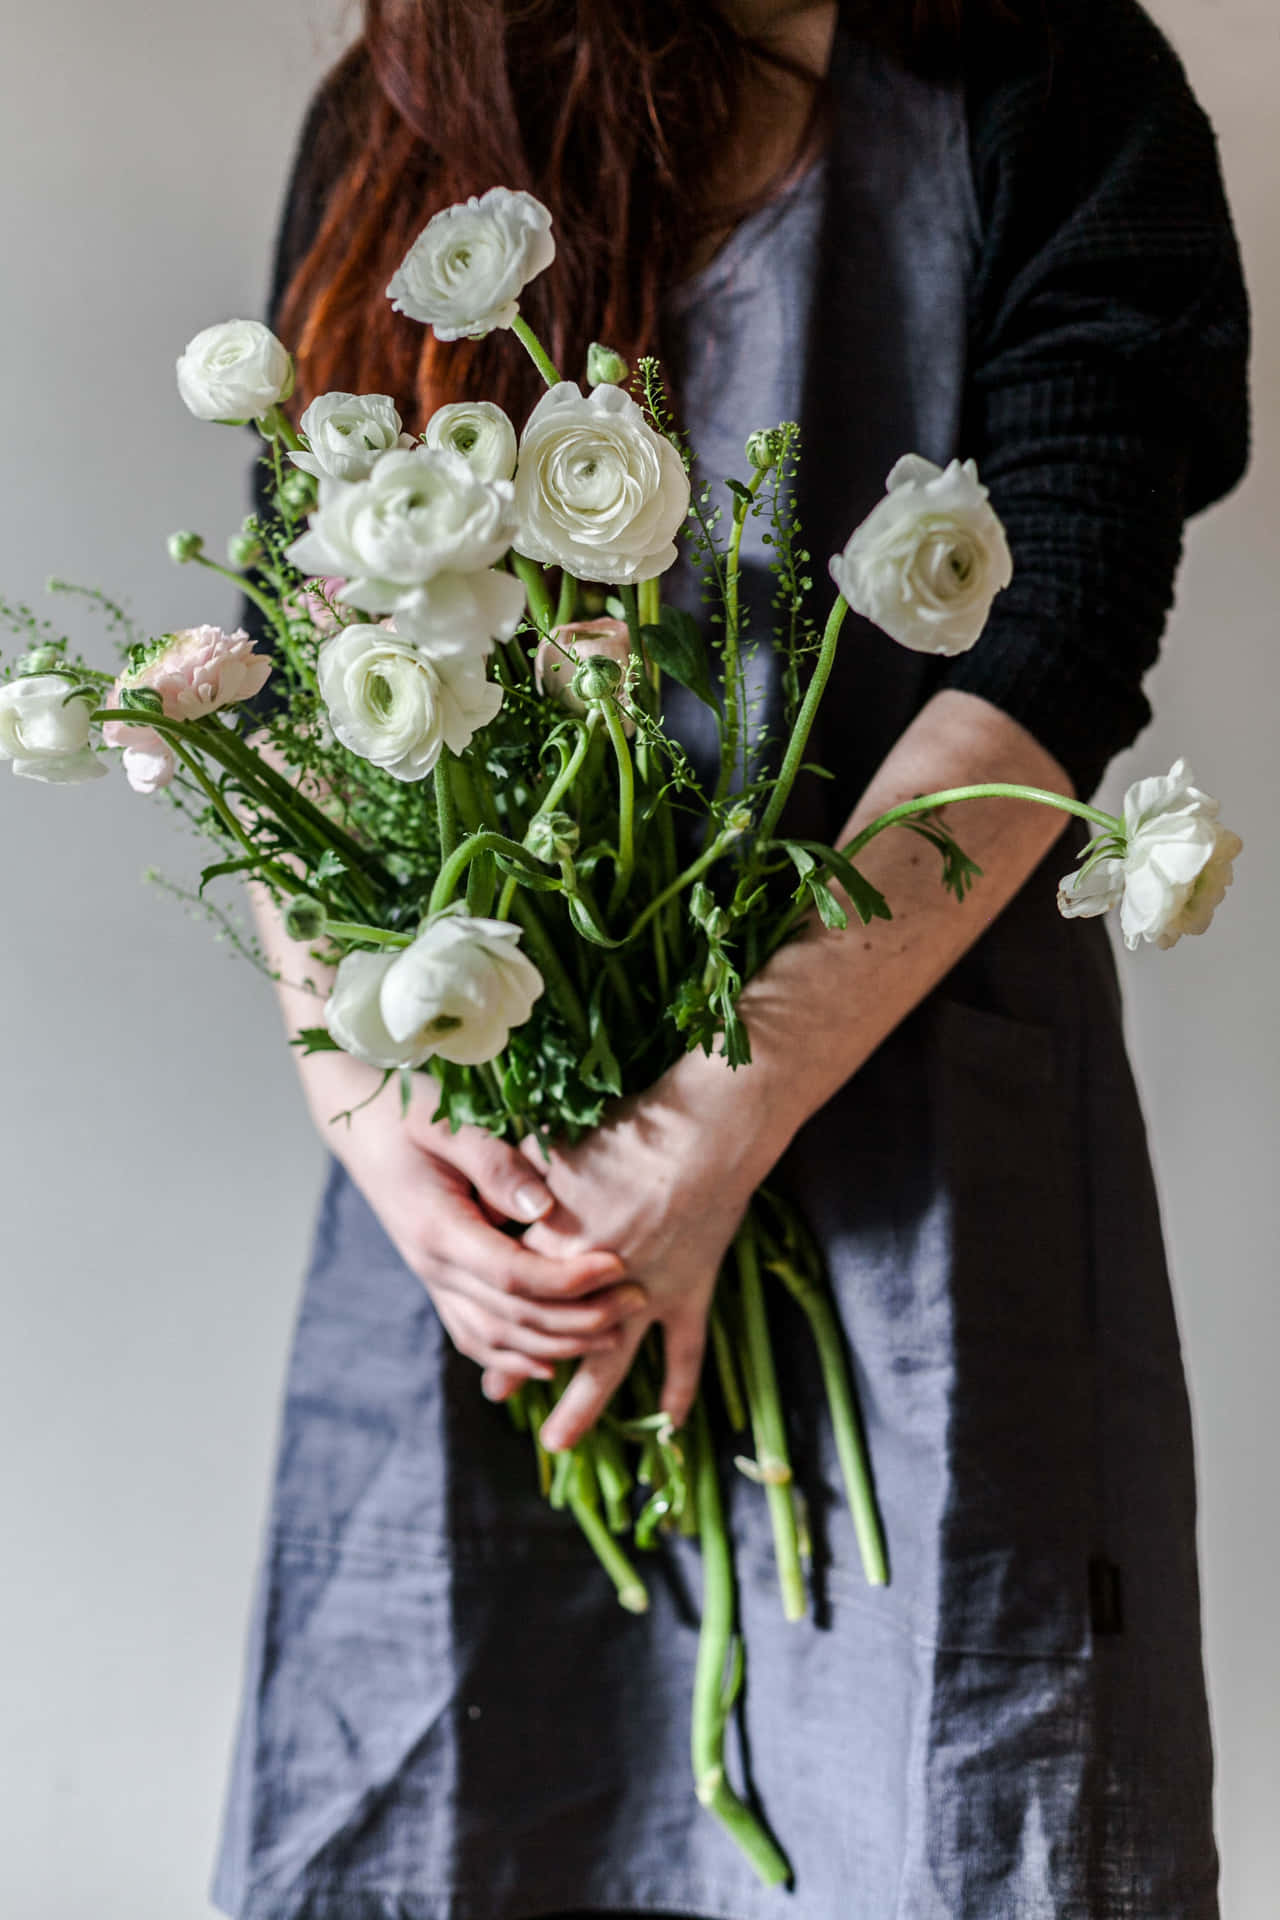 Portrait White Roses Holding By A Person Background